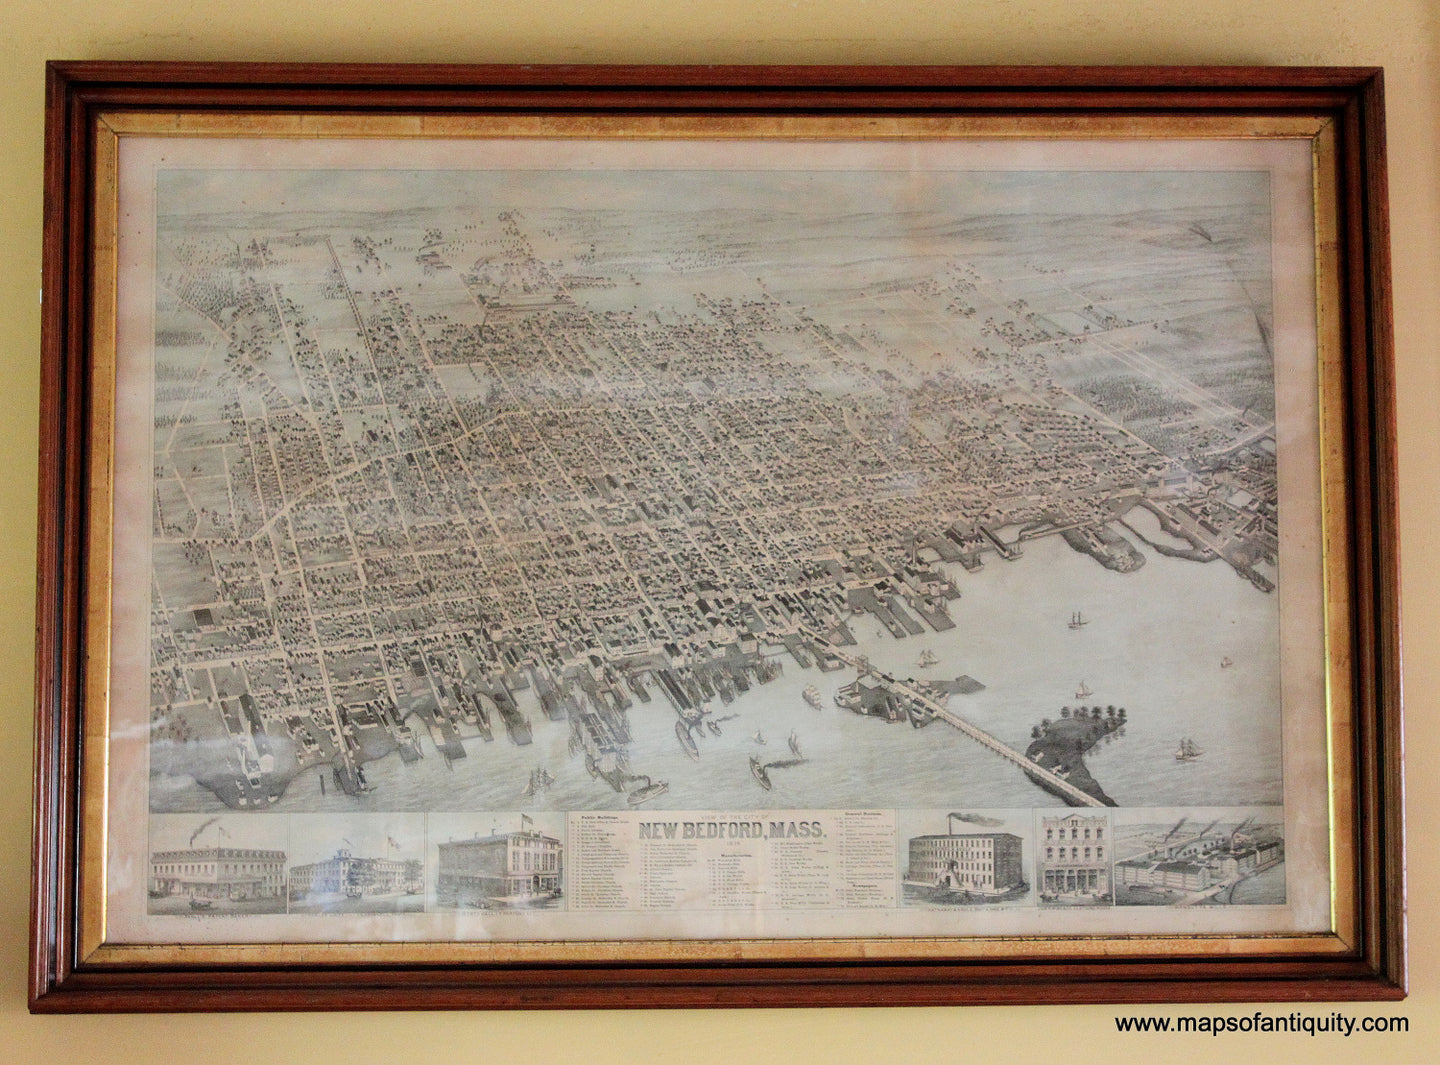 Antique-Bird's-Eye-View-Map-City-of-New-Bedford-Mass---Framed-United-States-Massachusetts-1876-Vogt-Maps-Of-Antiquity